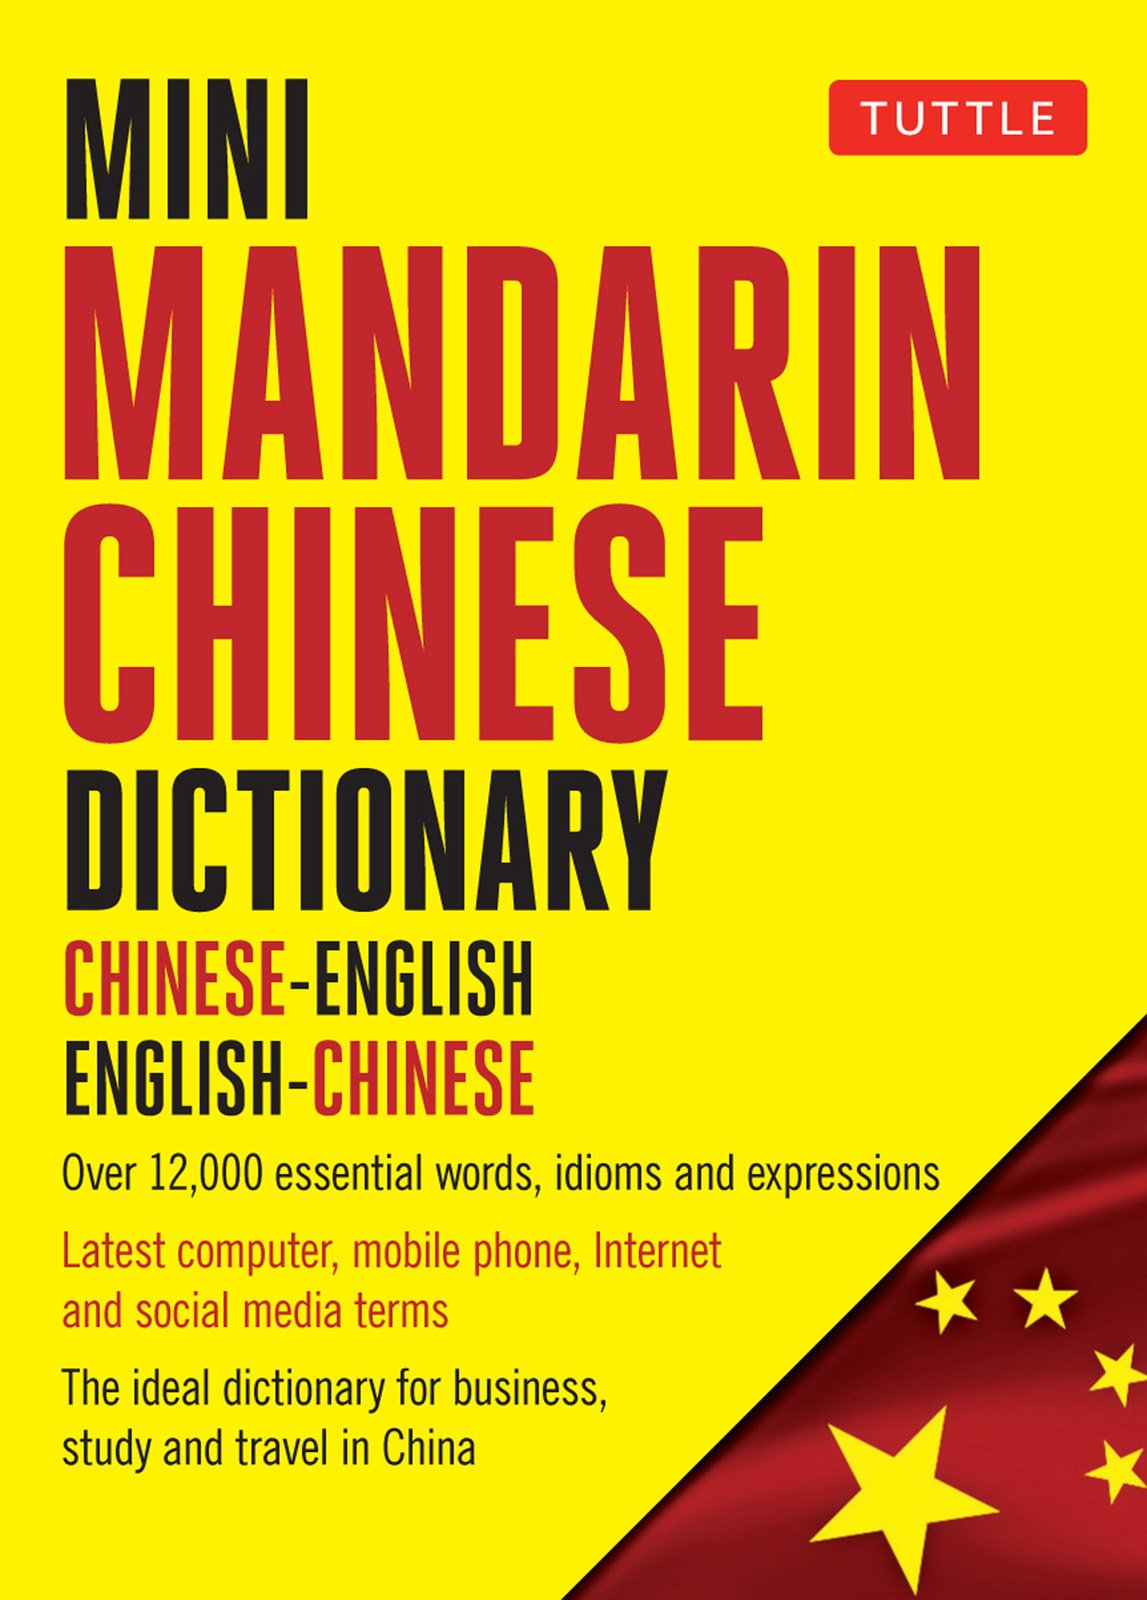 english to chinese dictionary free download pdf